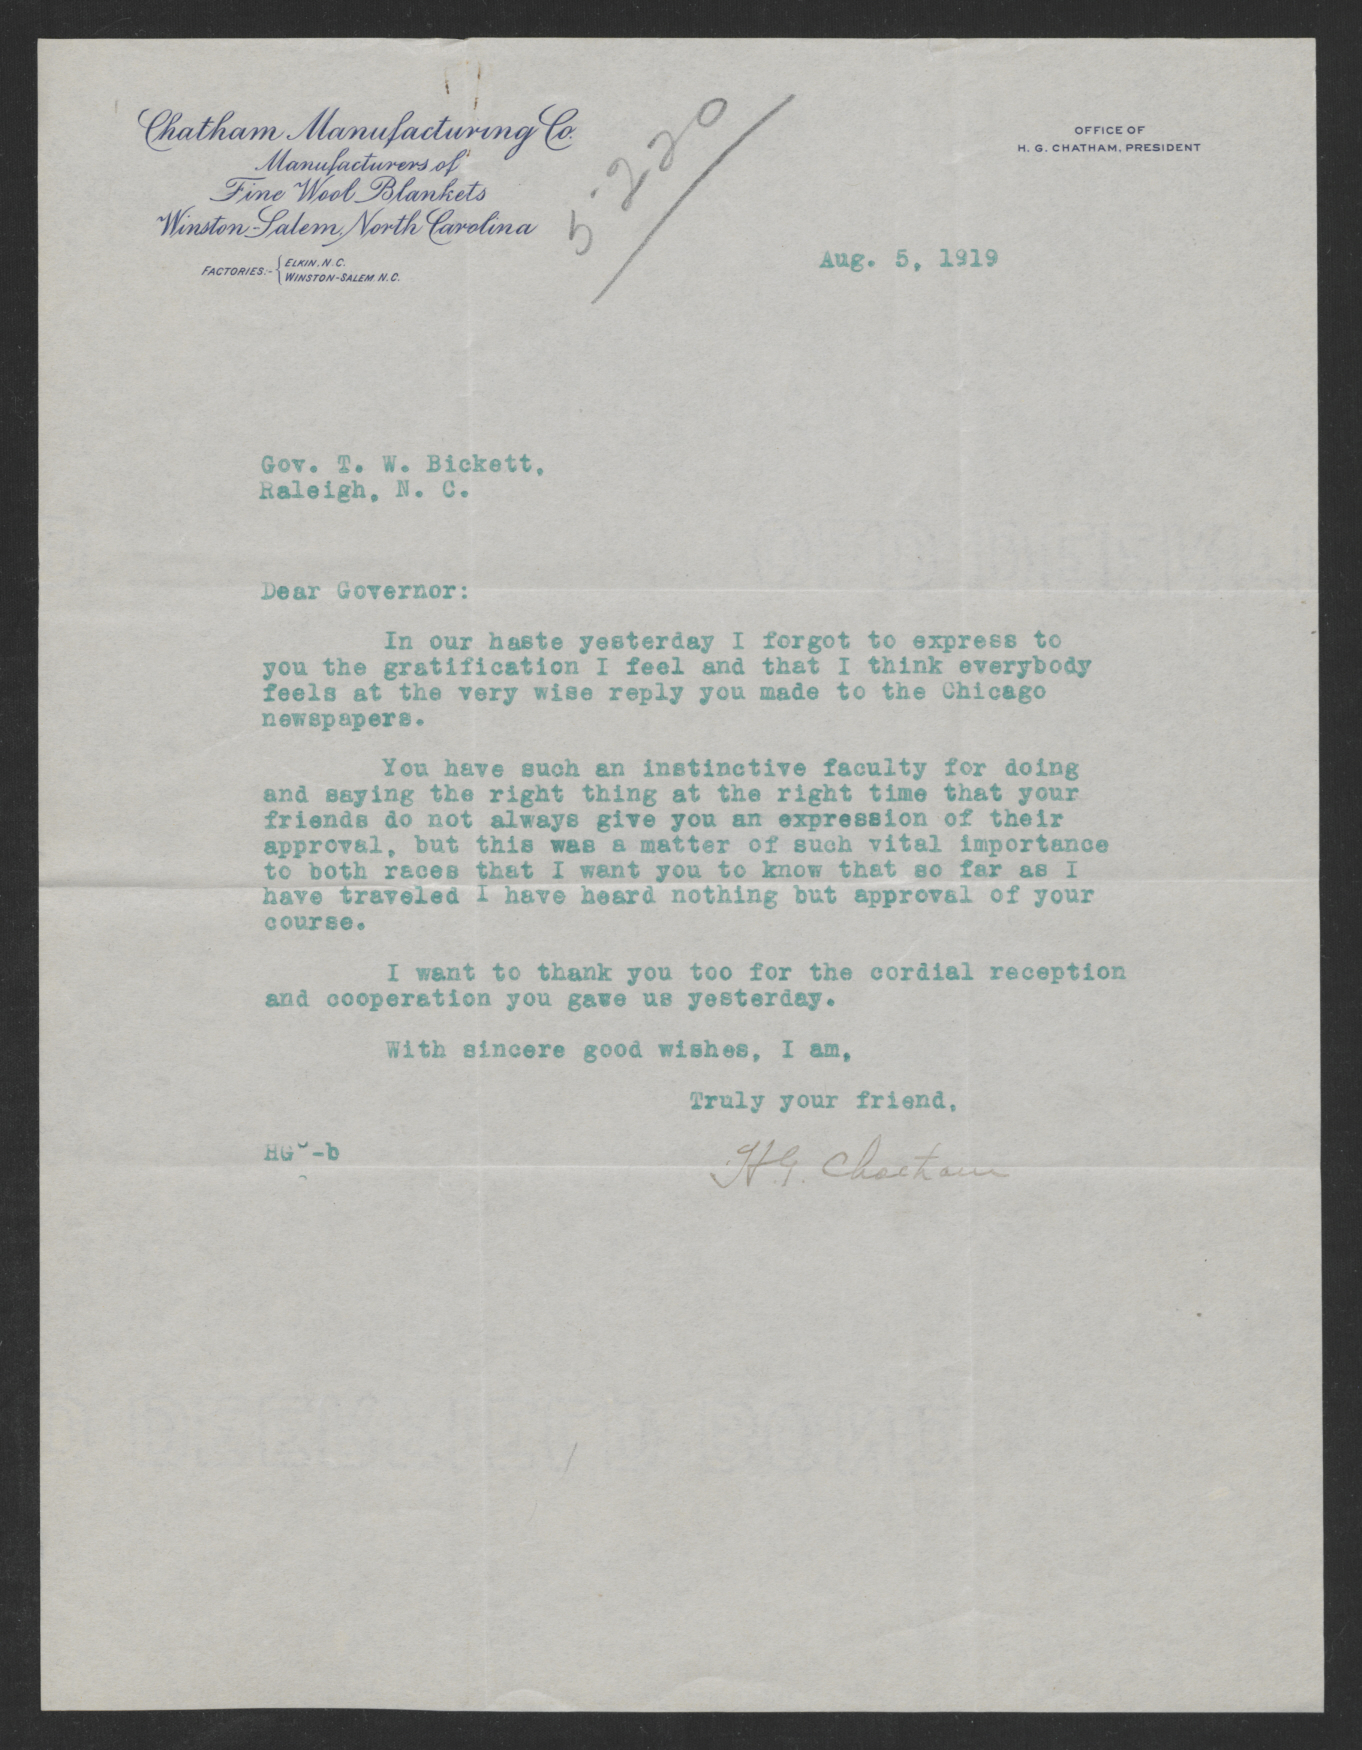 Letter from Hugh G. Chatham to Gov. Thomas W. Bickett, August 5, 1919